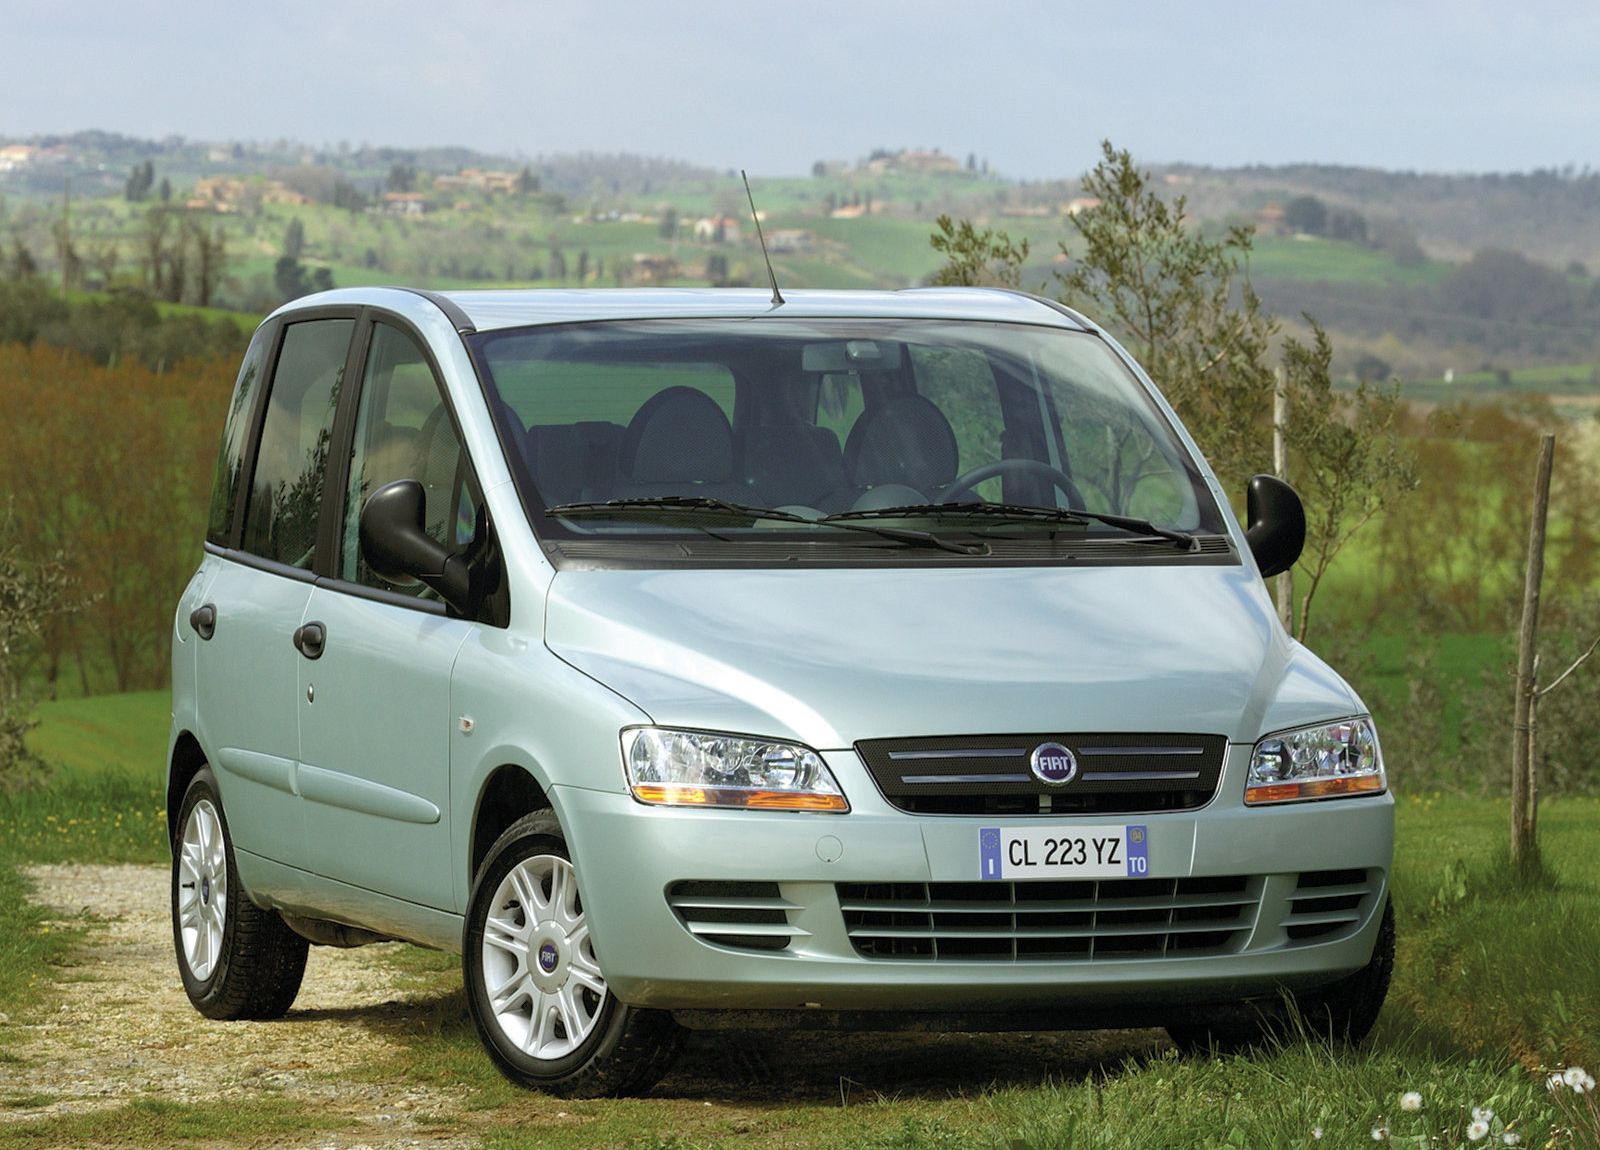 2004 Fiat Multipla, facelifted